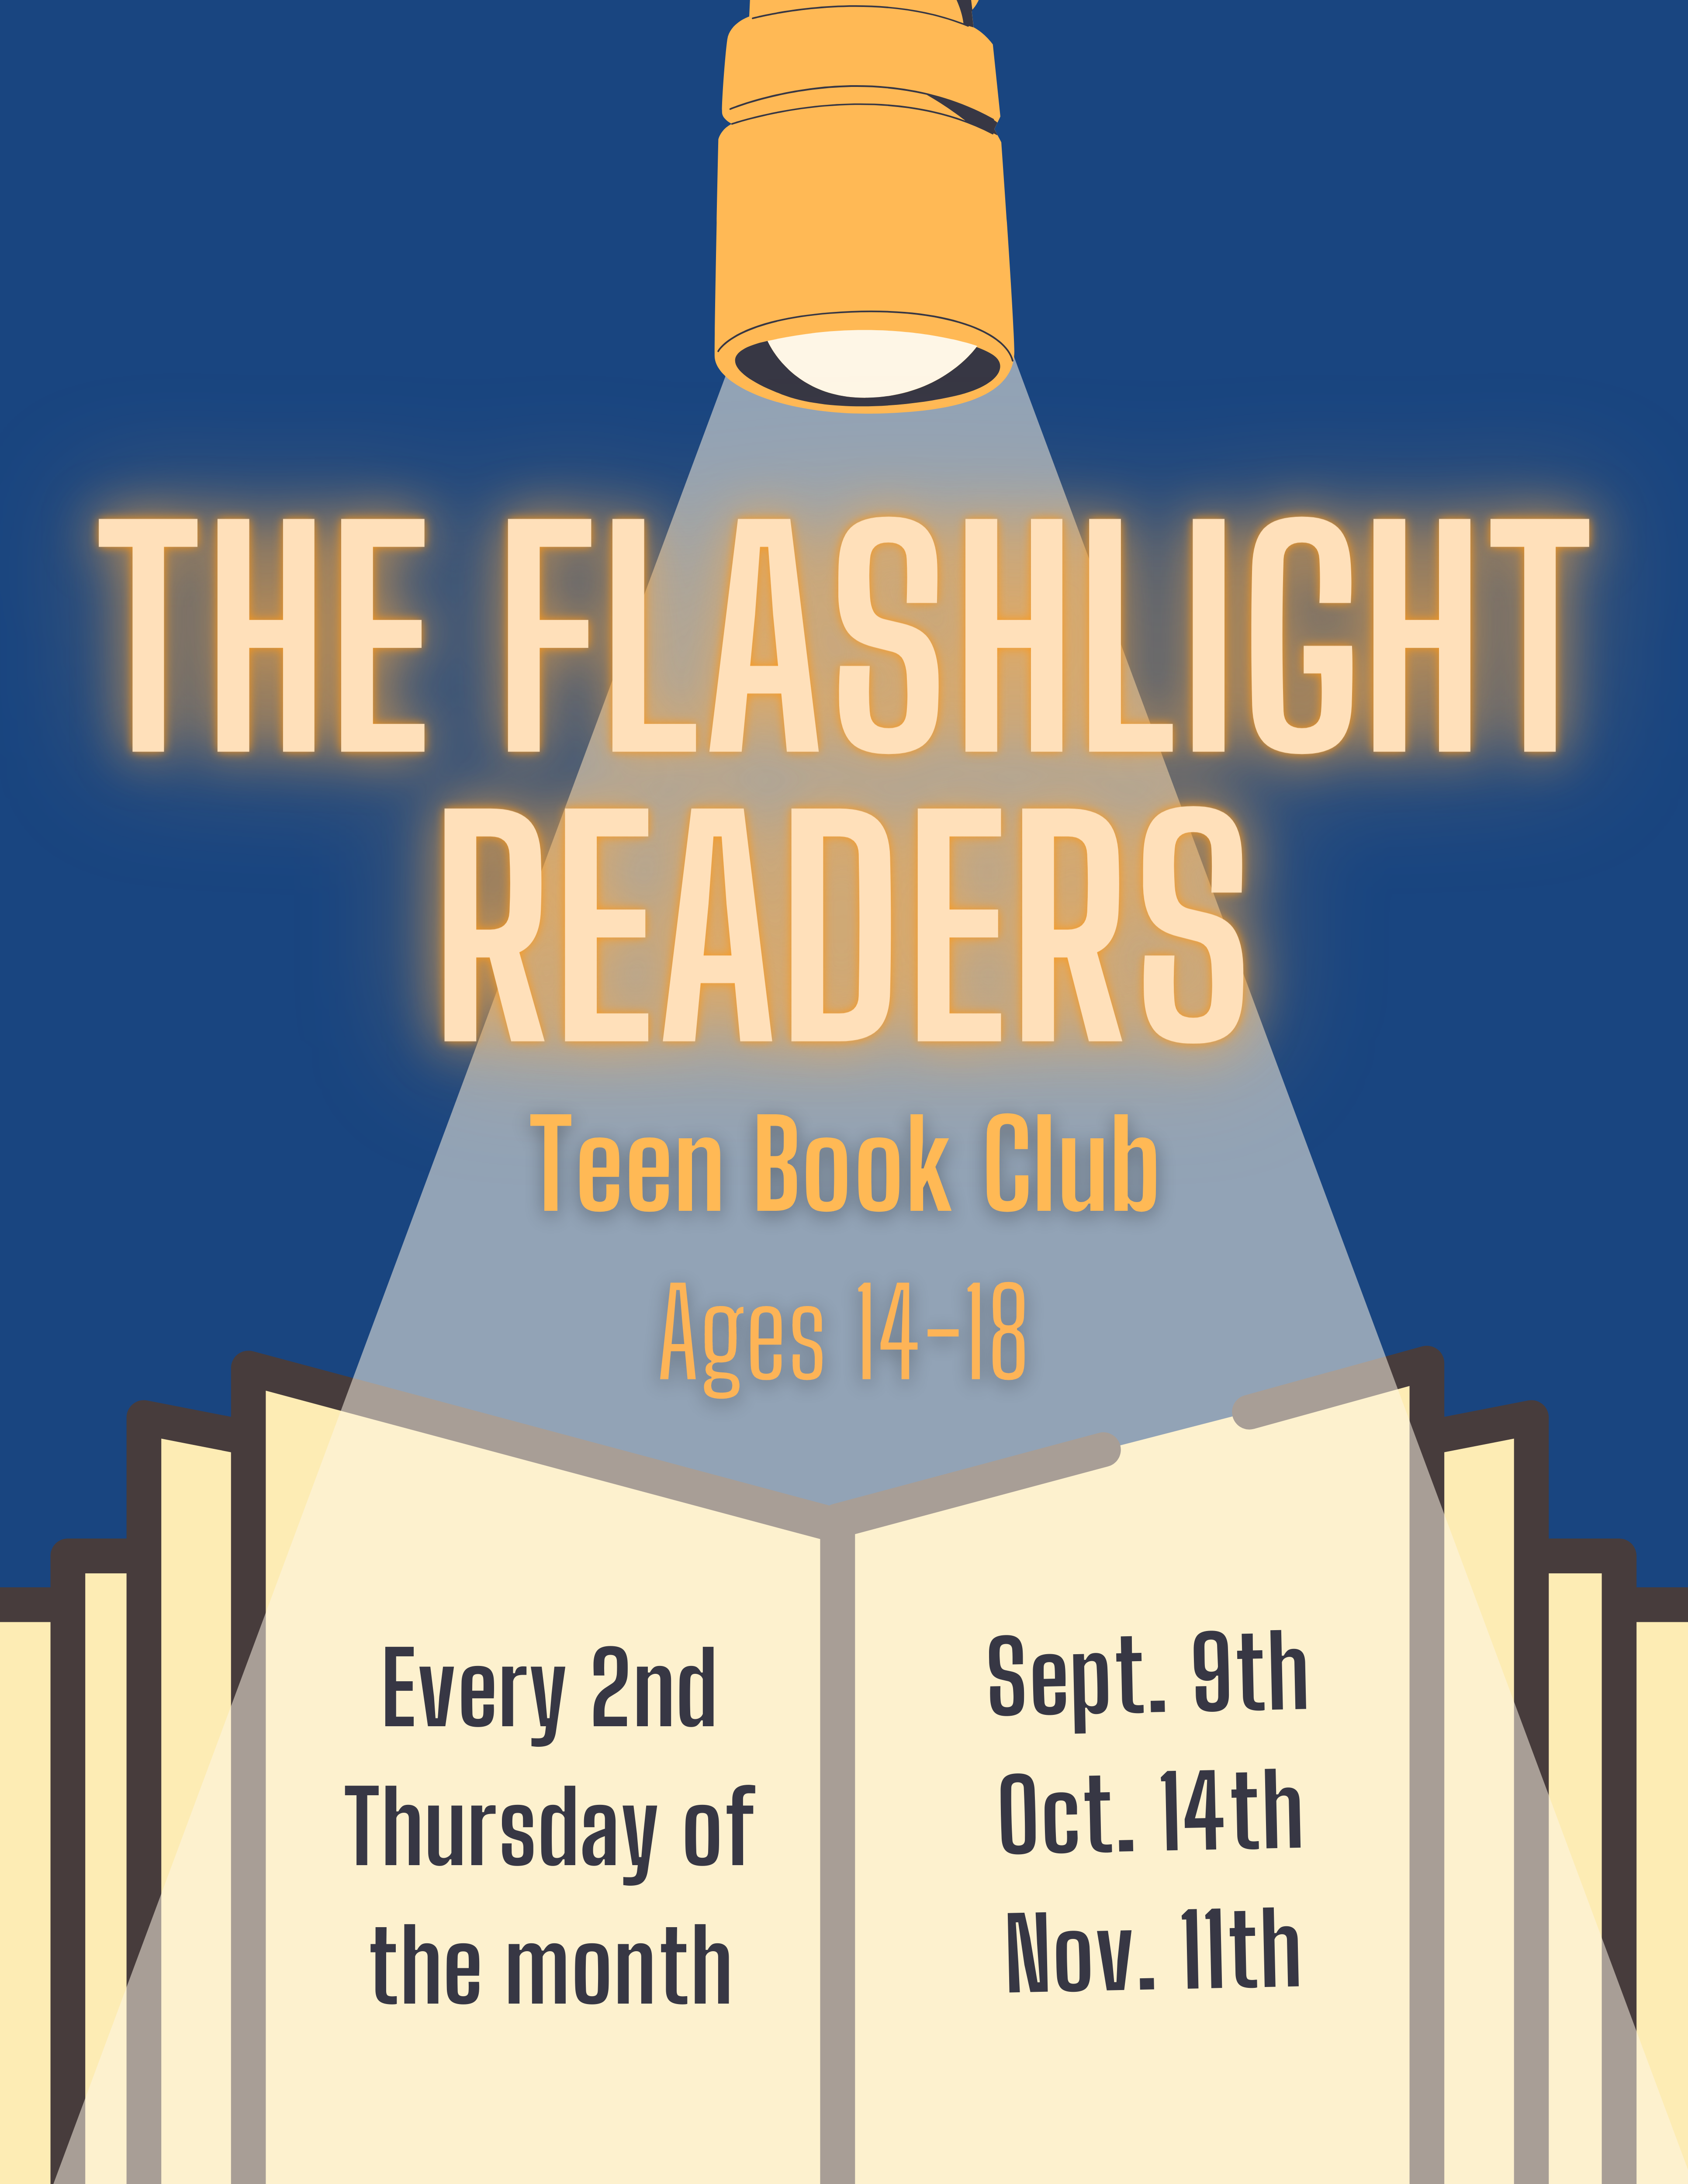 An image of a flashlight pointing its light onto an open book's pages. There is text that reads "The Flashlight Readers Teen Book Club. Ages 14-18. Every 2nd Thursday of the month. September 9th, October 14th, November 11th. "